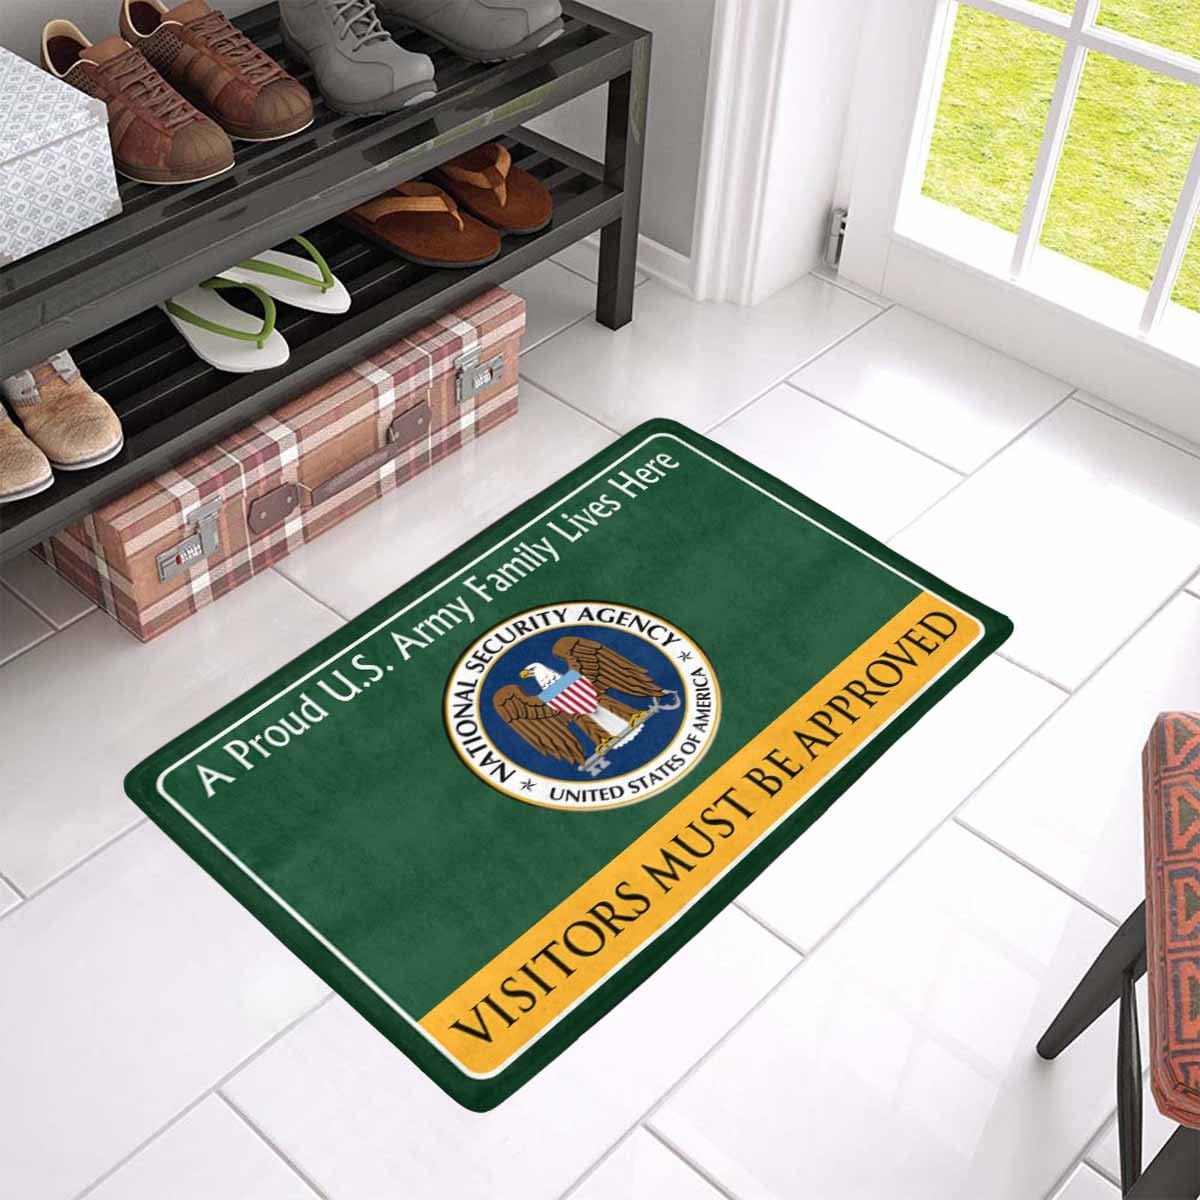 U.S National Security Agency Family Doormat - Visitors must be approved Doormat (23.6 inches x 15.7 inches)-Doormat-Army-Branch-Veterans Nation